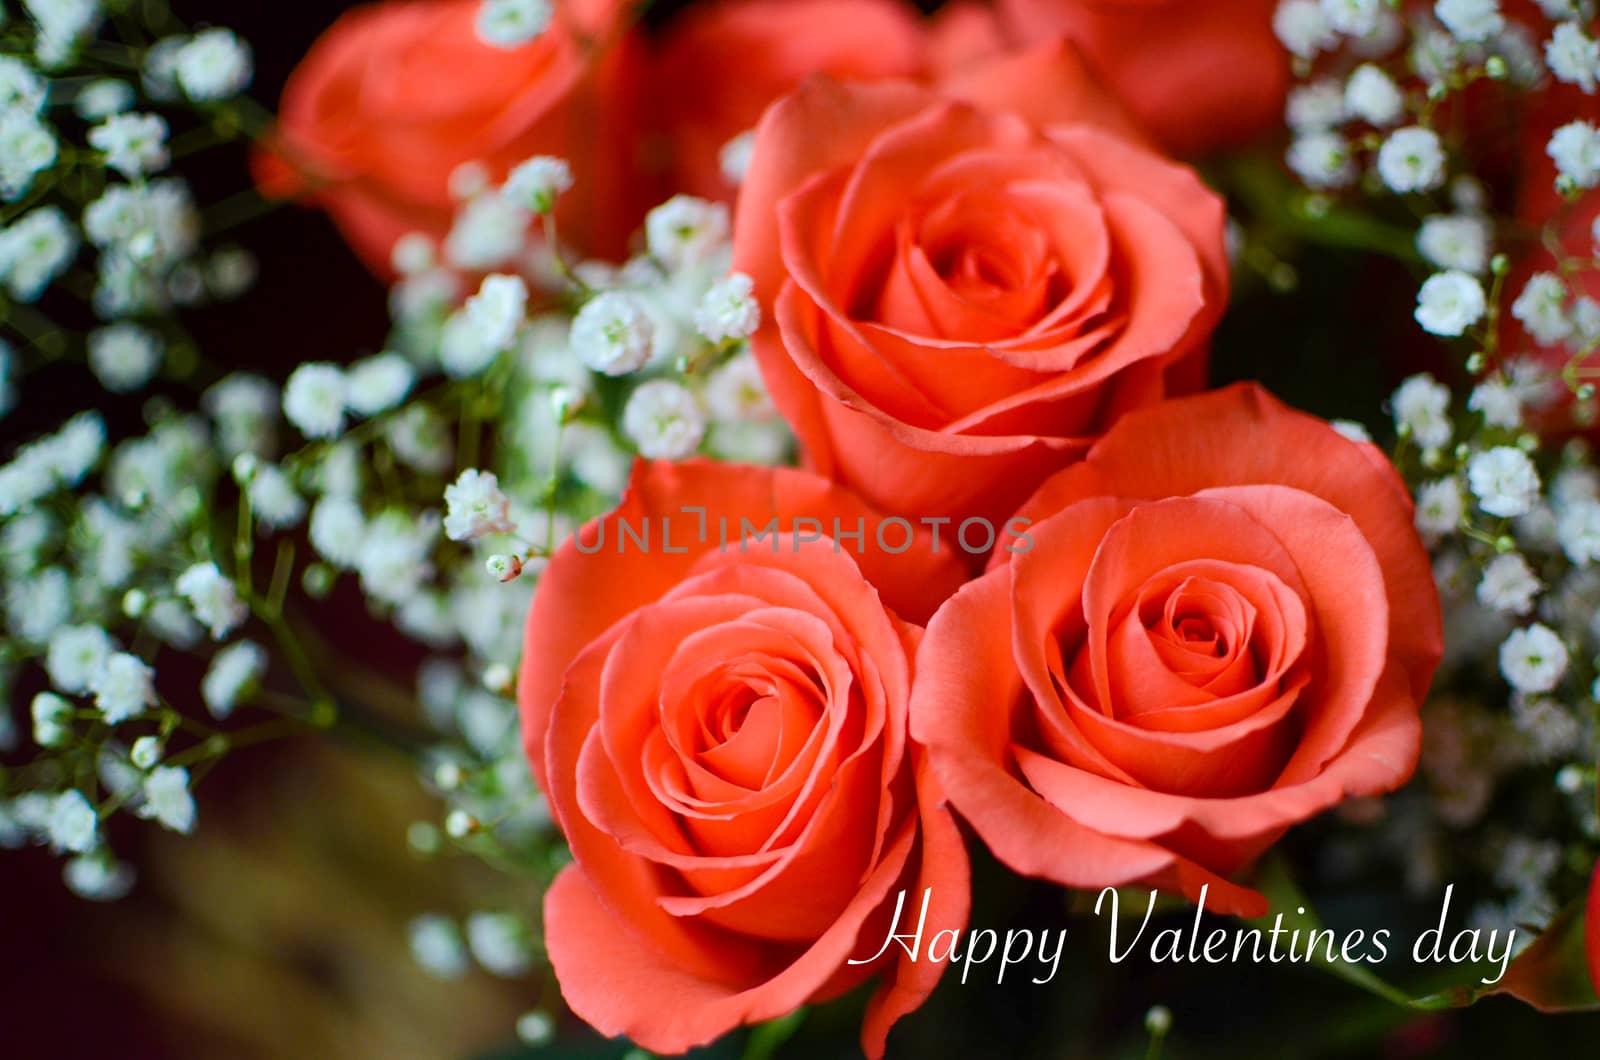 Valentines day concept of a close up view of a bunch of red roses with Happy Valentines day text by benentaylor